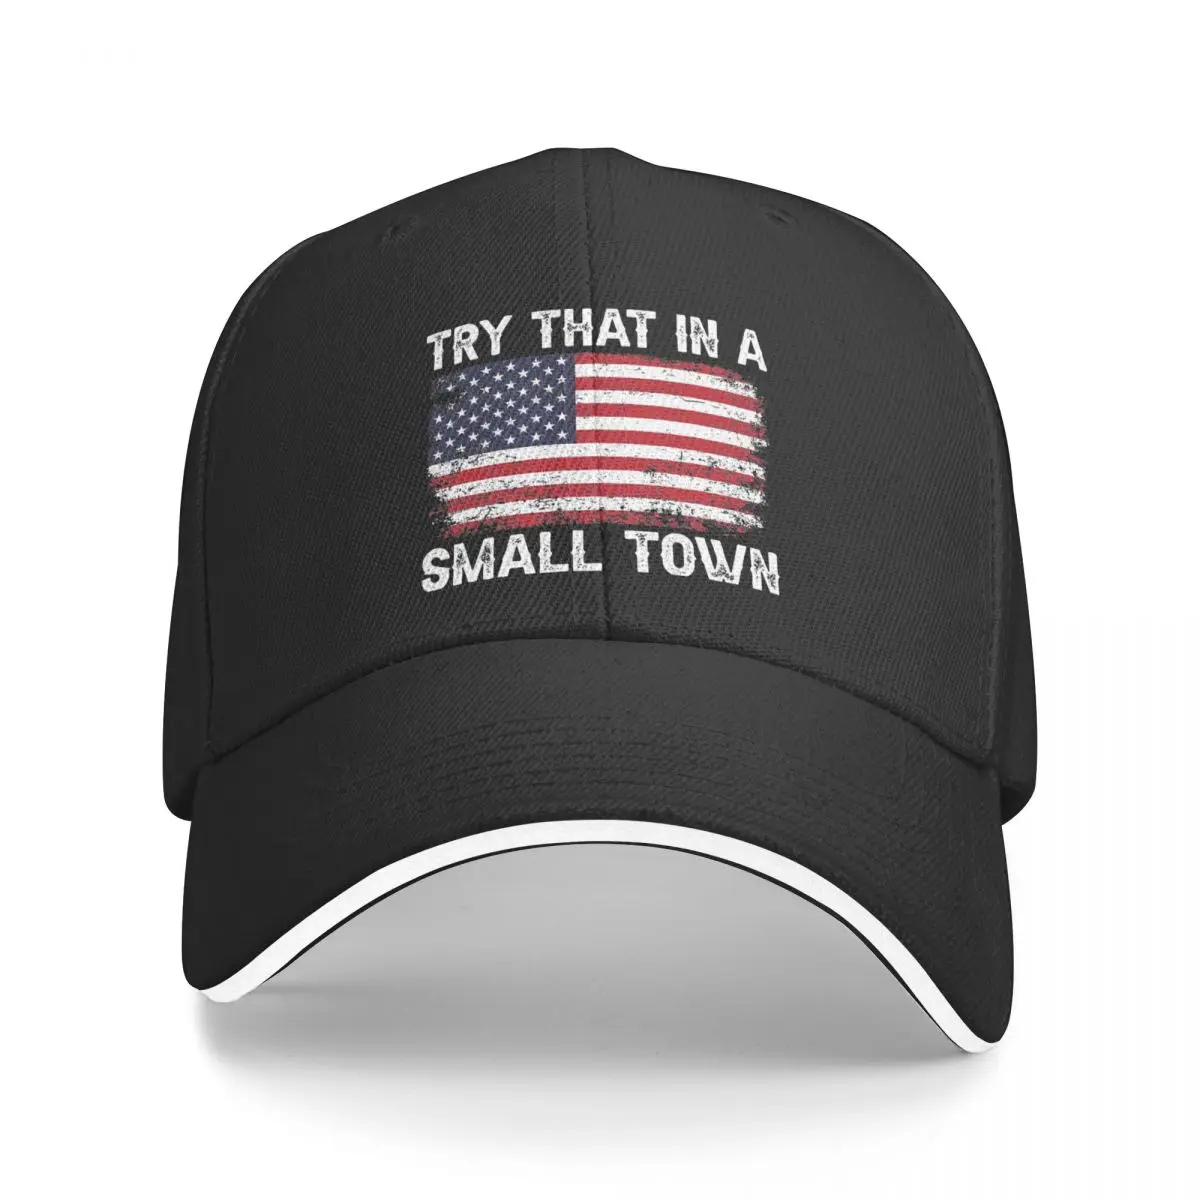 

Classic Try That In A Small Town USA Jason Aldean Golf Hat Unisex Sun Cap Daily Golf Gift Caps Hat